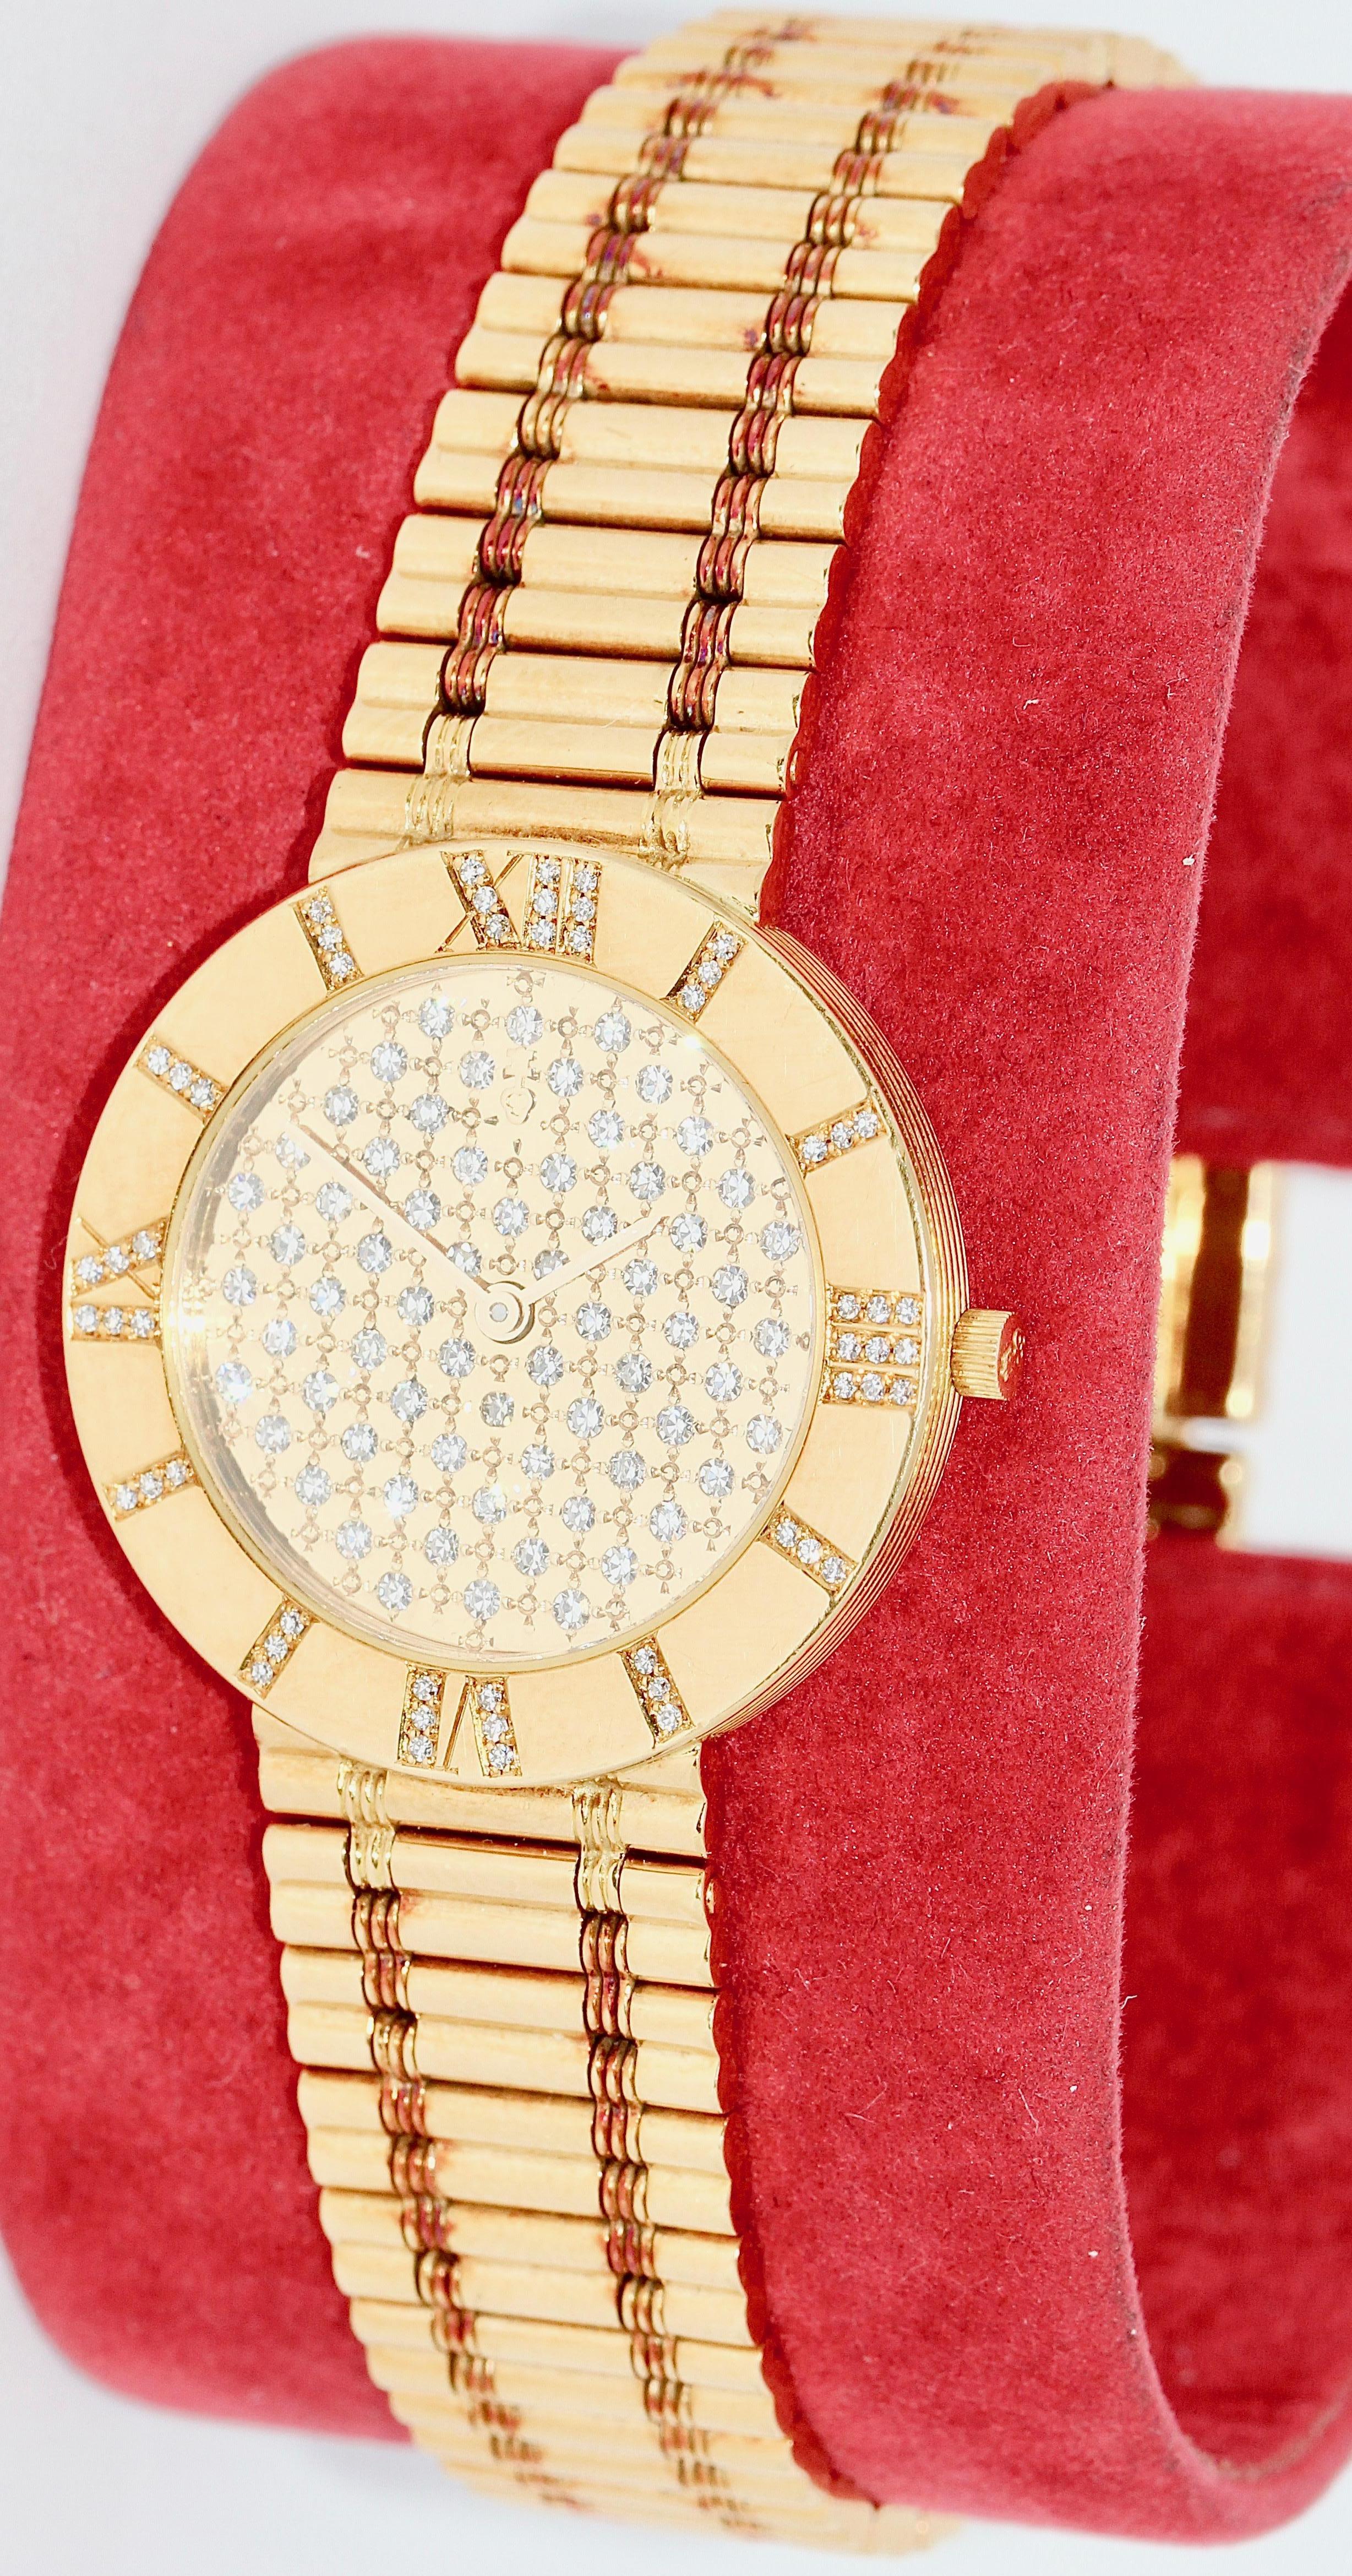 Corum Romvlvs Romulus Ladies Wrist Watch, 18 Karat Gold and Diamonds.

Rare model with diamond-dial and -bezel.
Including certificate of authenticity, box and papers.

The watch will be overhauled before shipment! (New battery etc.)